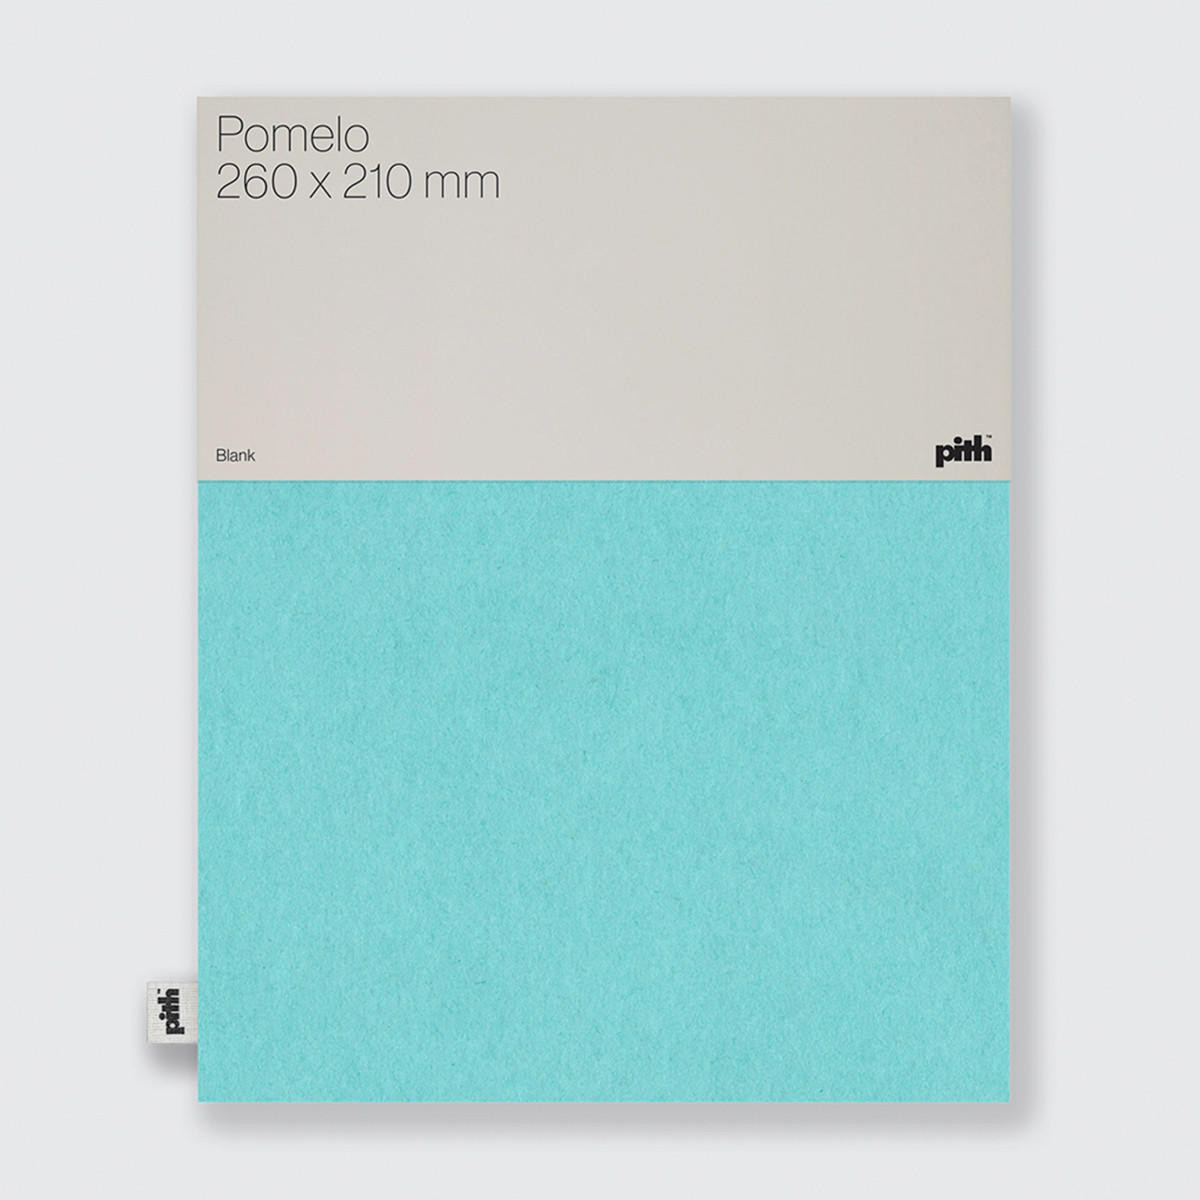 Pith Pomelo Notebook 130gsm 156 Pages 260 x 210mm - Azure